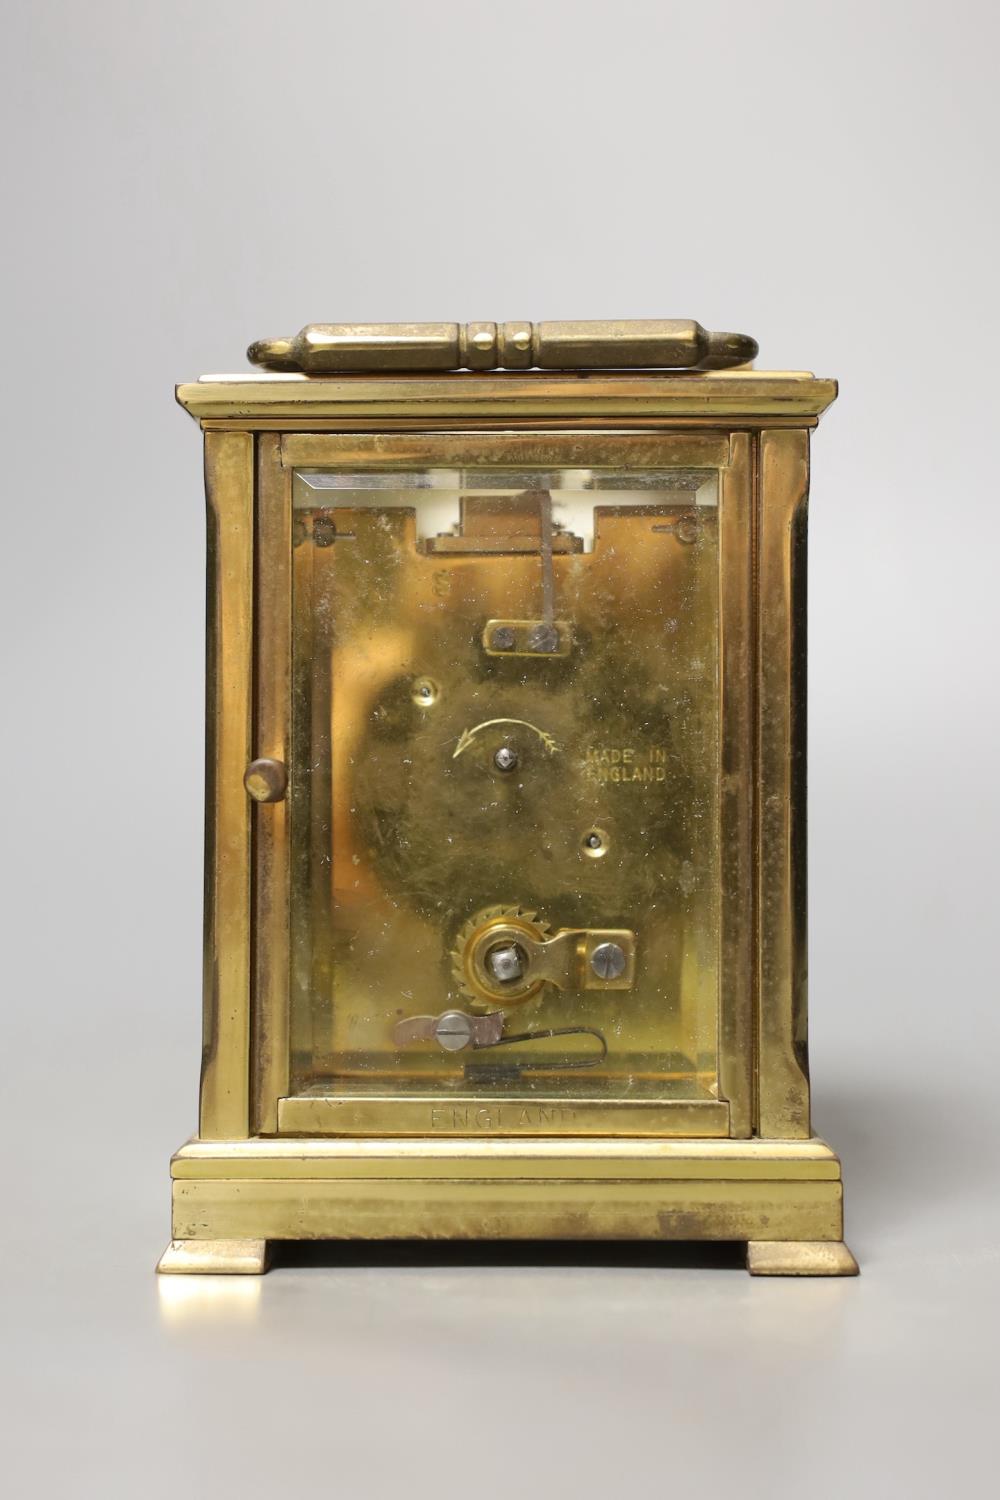 A Dent retailed brass carriage timepiece,12 cms high. - Image 3 of 5